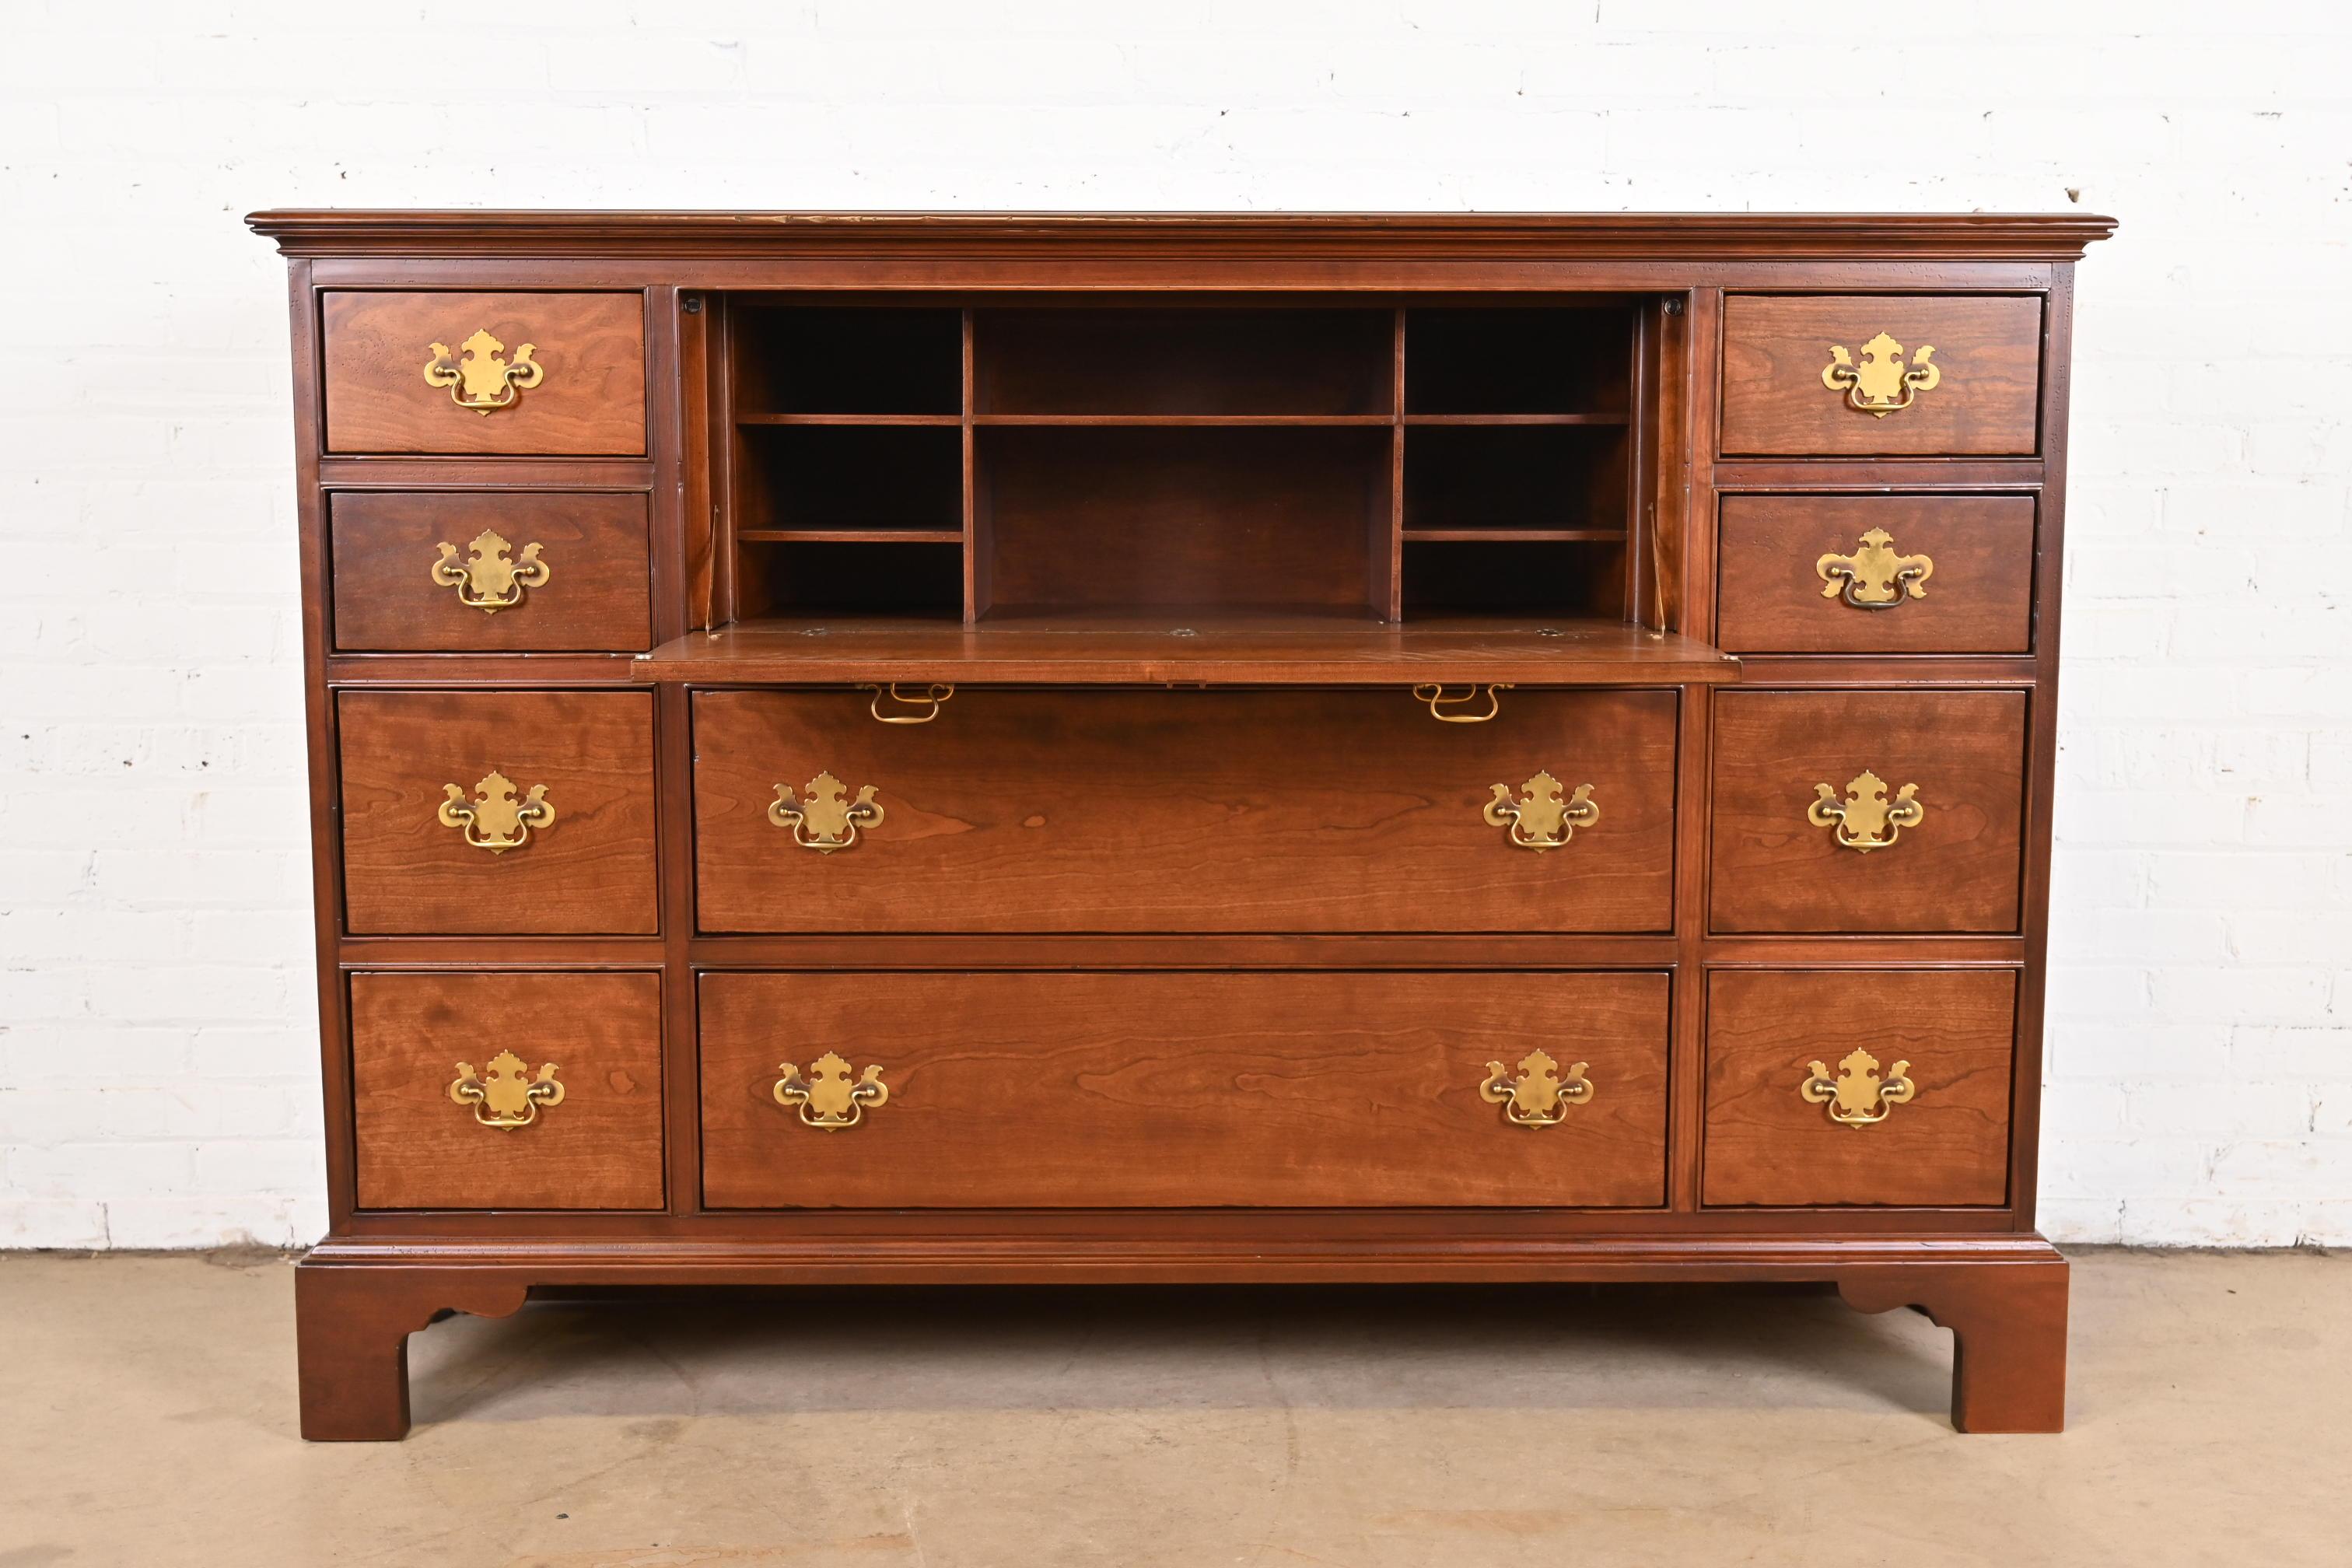 Baker Furniture Georgian Cherry Chest of Drawers with Secretary Desk, Refinished 2